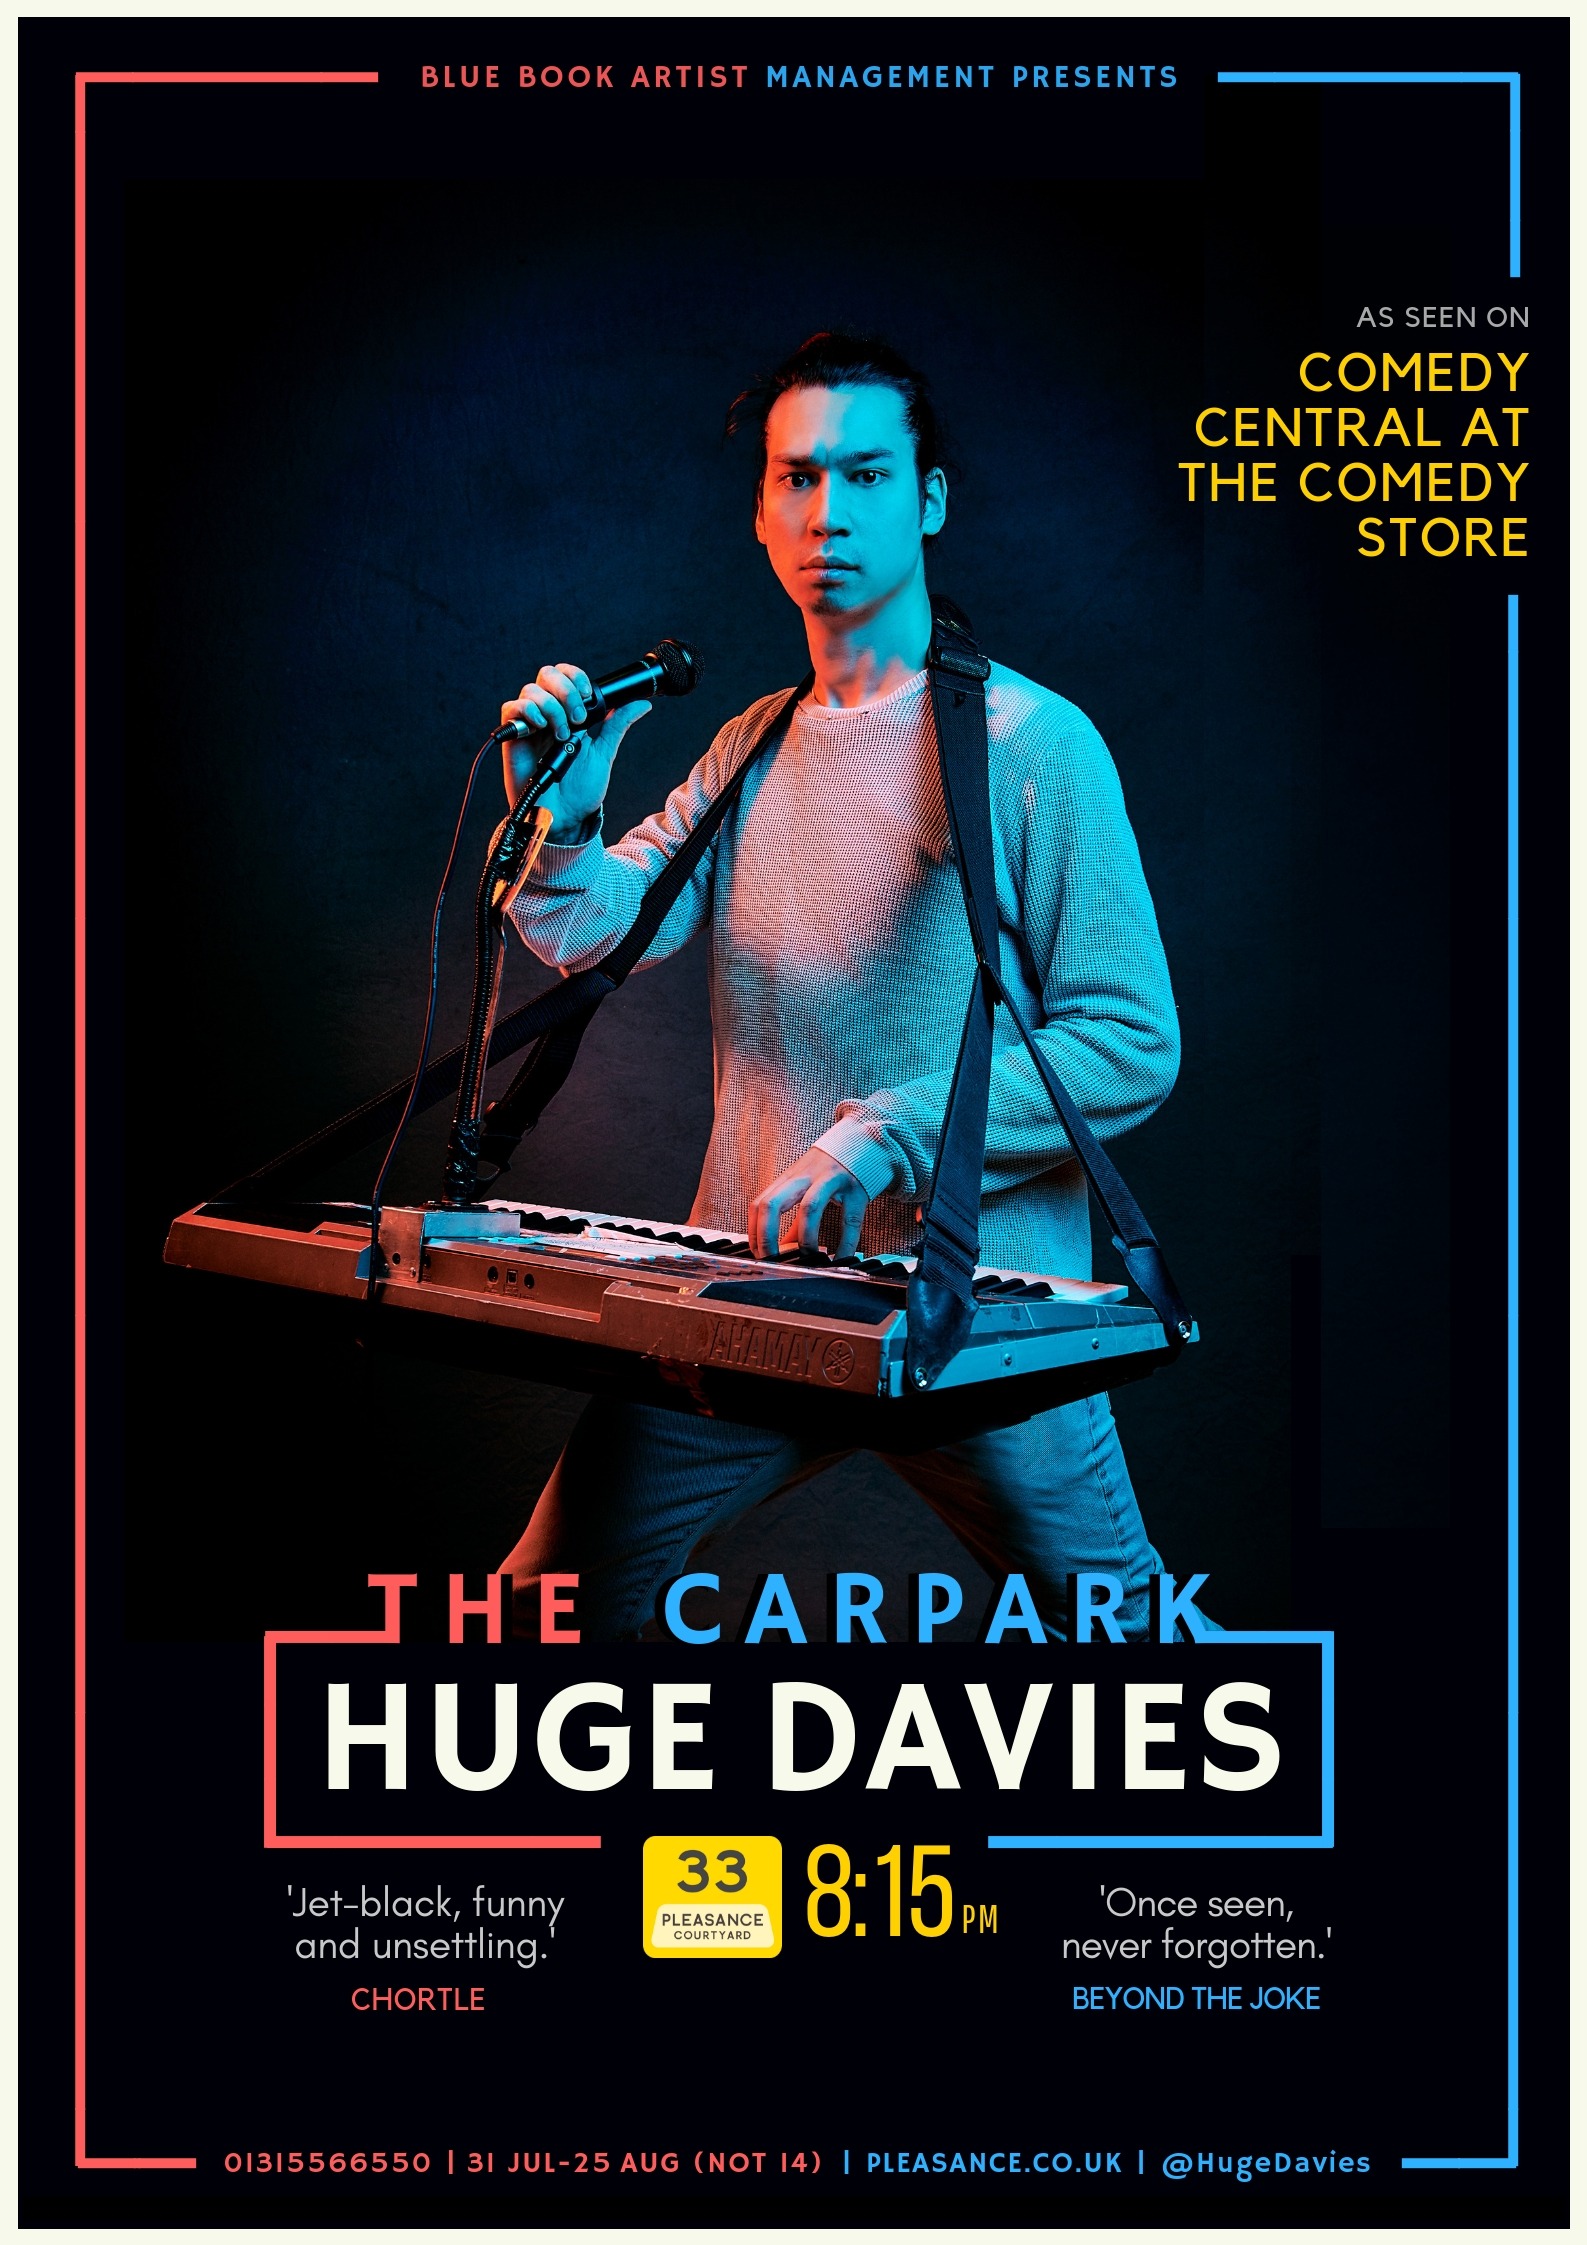 The poster for Huge Davies: The Carpark